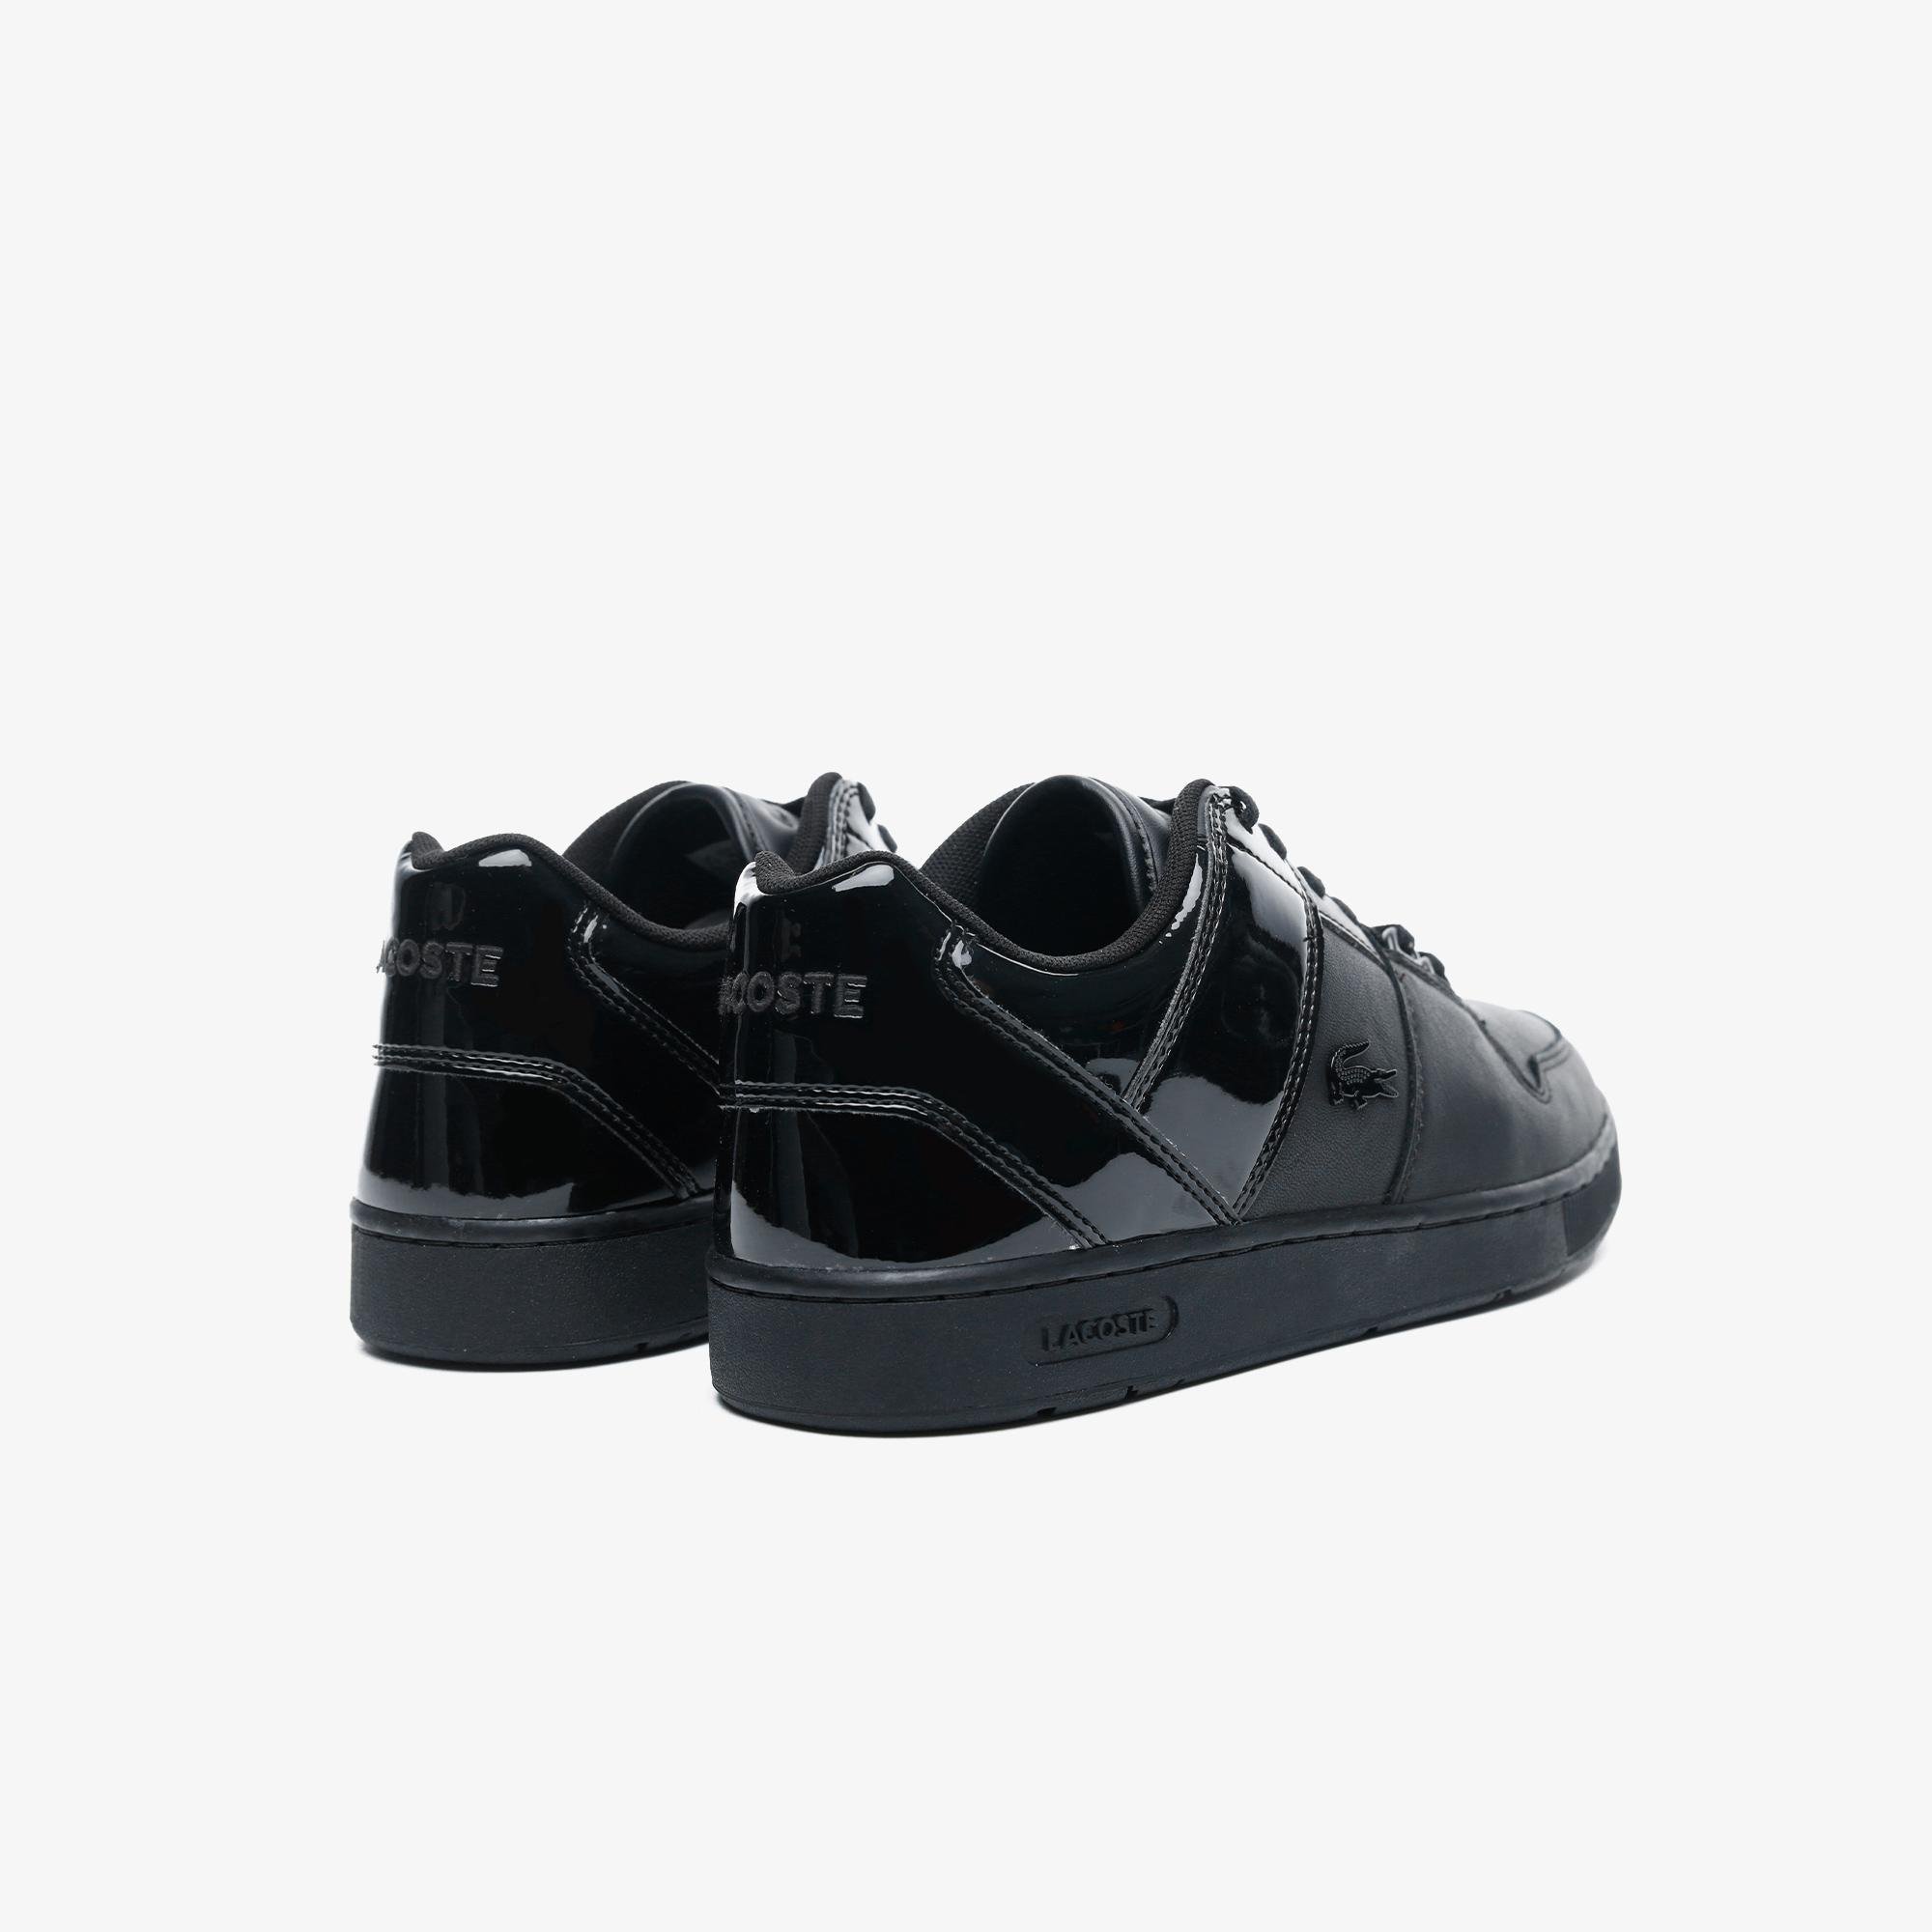 Lacoste Women's Thrill Leather and Synthetic Sneakers